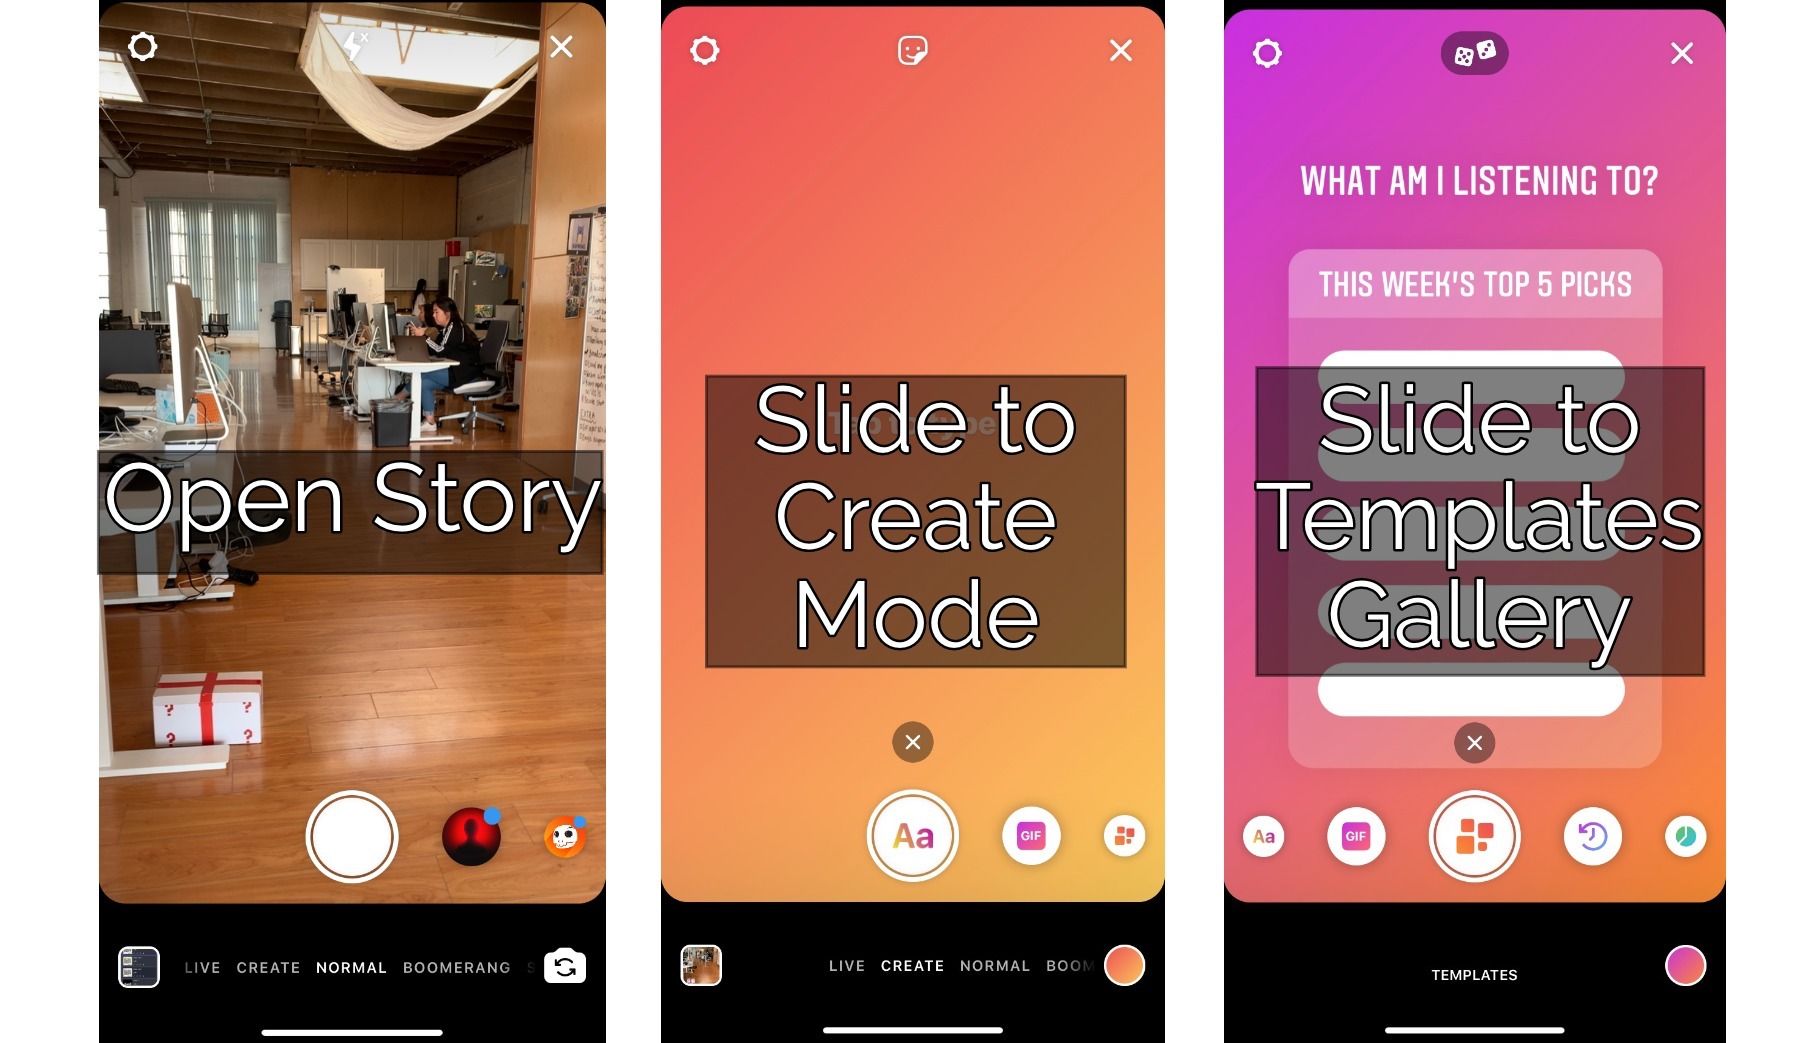 How to Use Templates in an Instagram Story For Your Next Challenge?